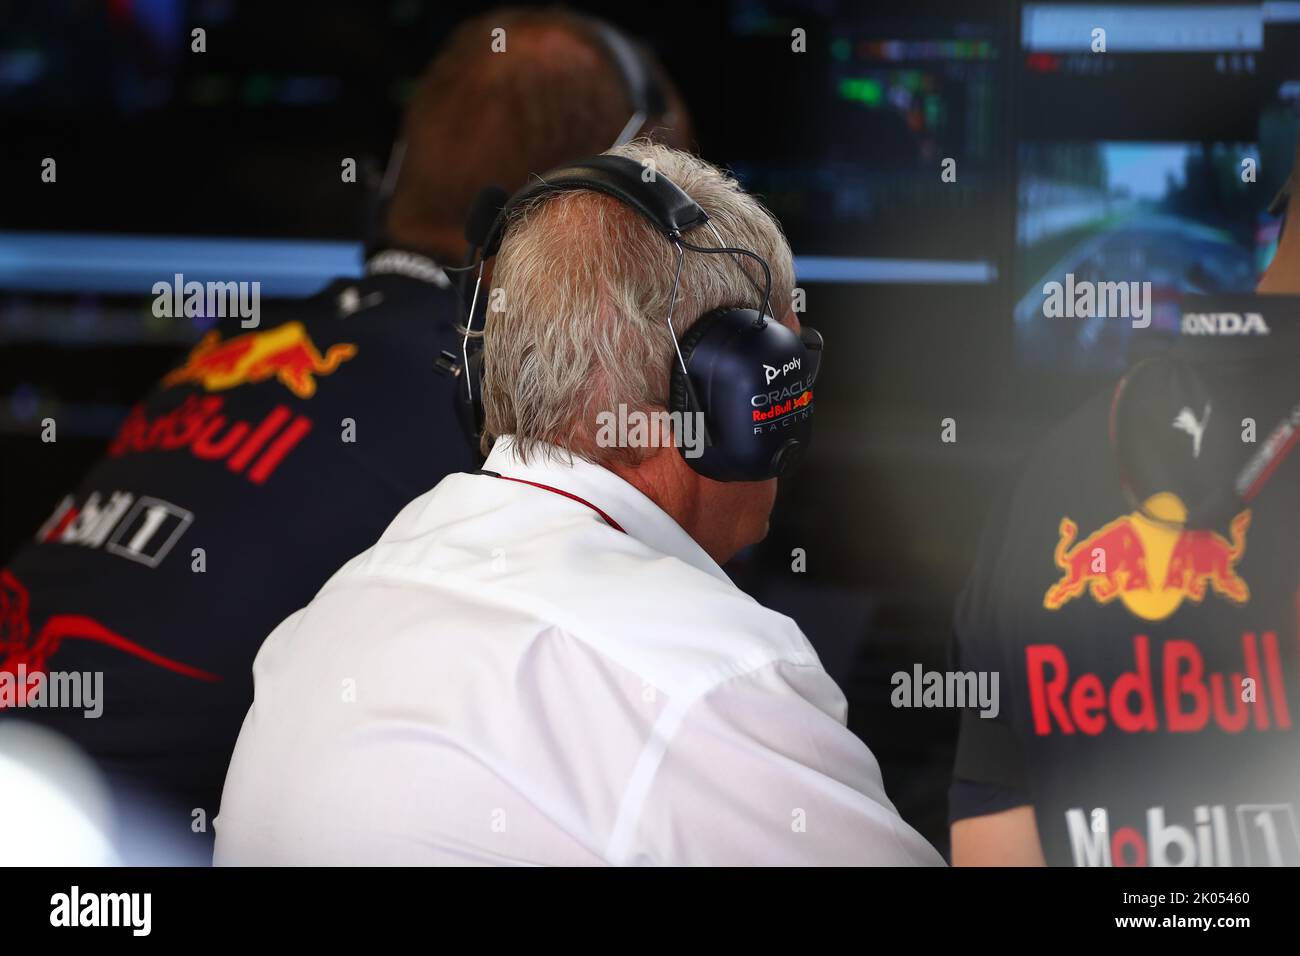 Monza, Italy. 27th Jan, 2022. Helmut Marko former professional racing driver and current advisor to the Red Bull GmbH Formula One teams, and head of Red Bull's driver development program during the Italian GP, 8-11 September 2022 at Monza track, Formula 1 World championship 2022. Credit: Independent Photo Agency/Alamy Live News Stock Photo